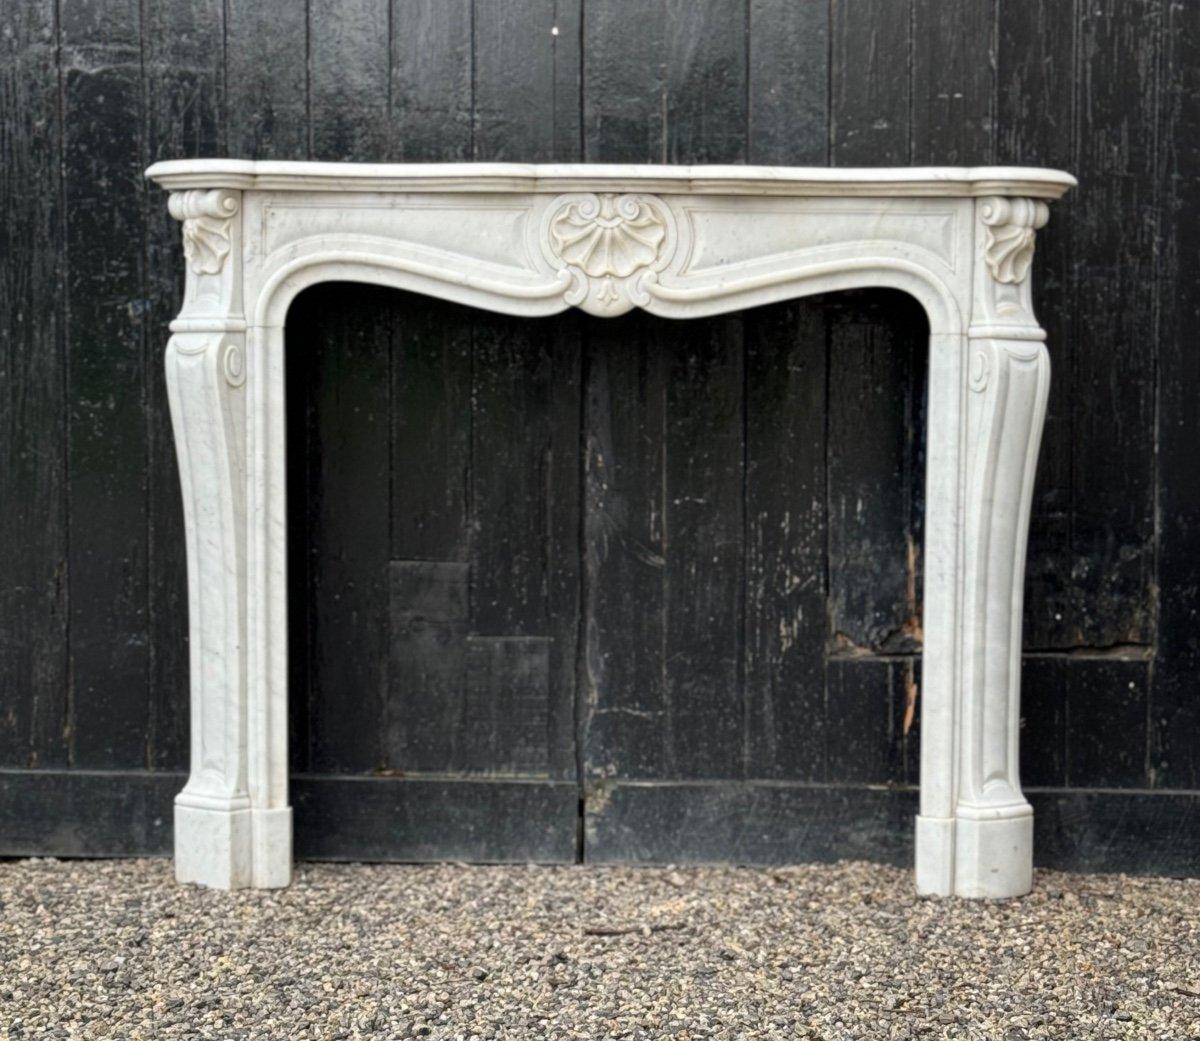 Louis XV Style Fireplace In Carrara Marble Circa 1880 
Dimensions of the hearth: 97.5 x 108 cm